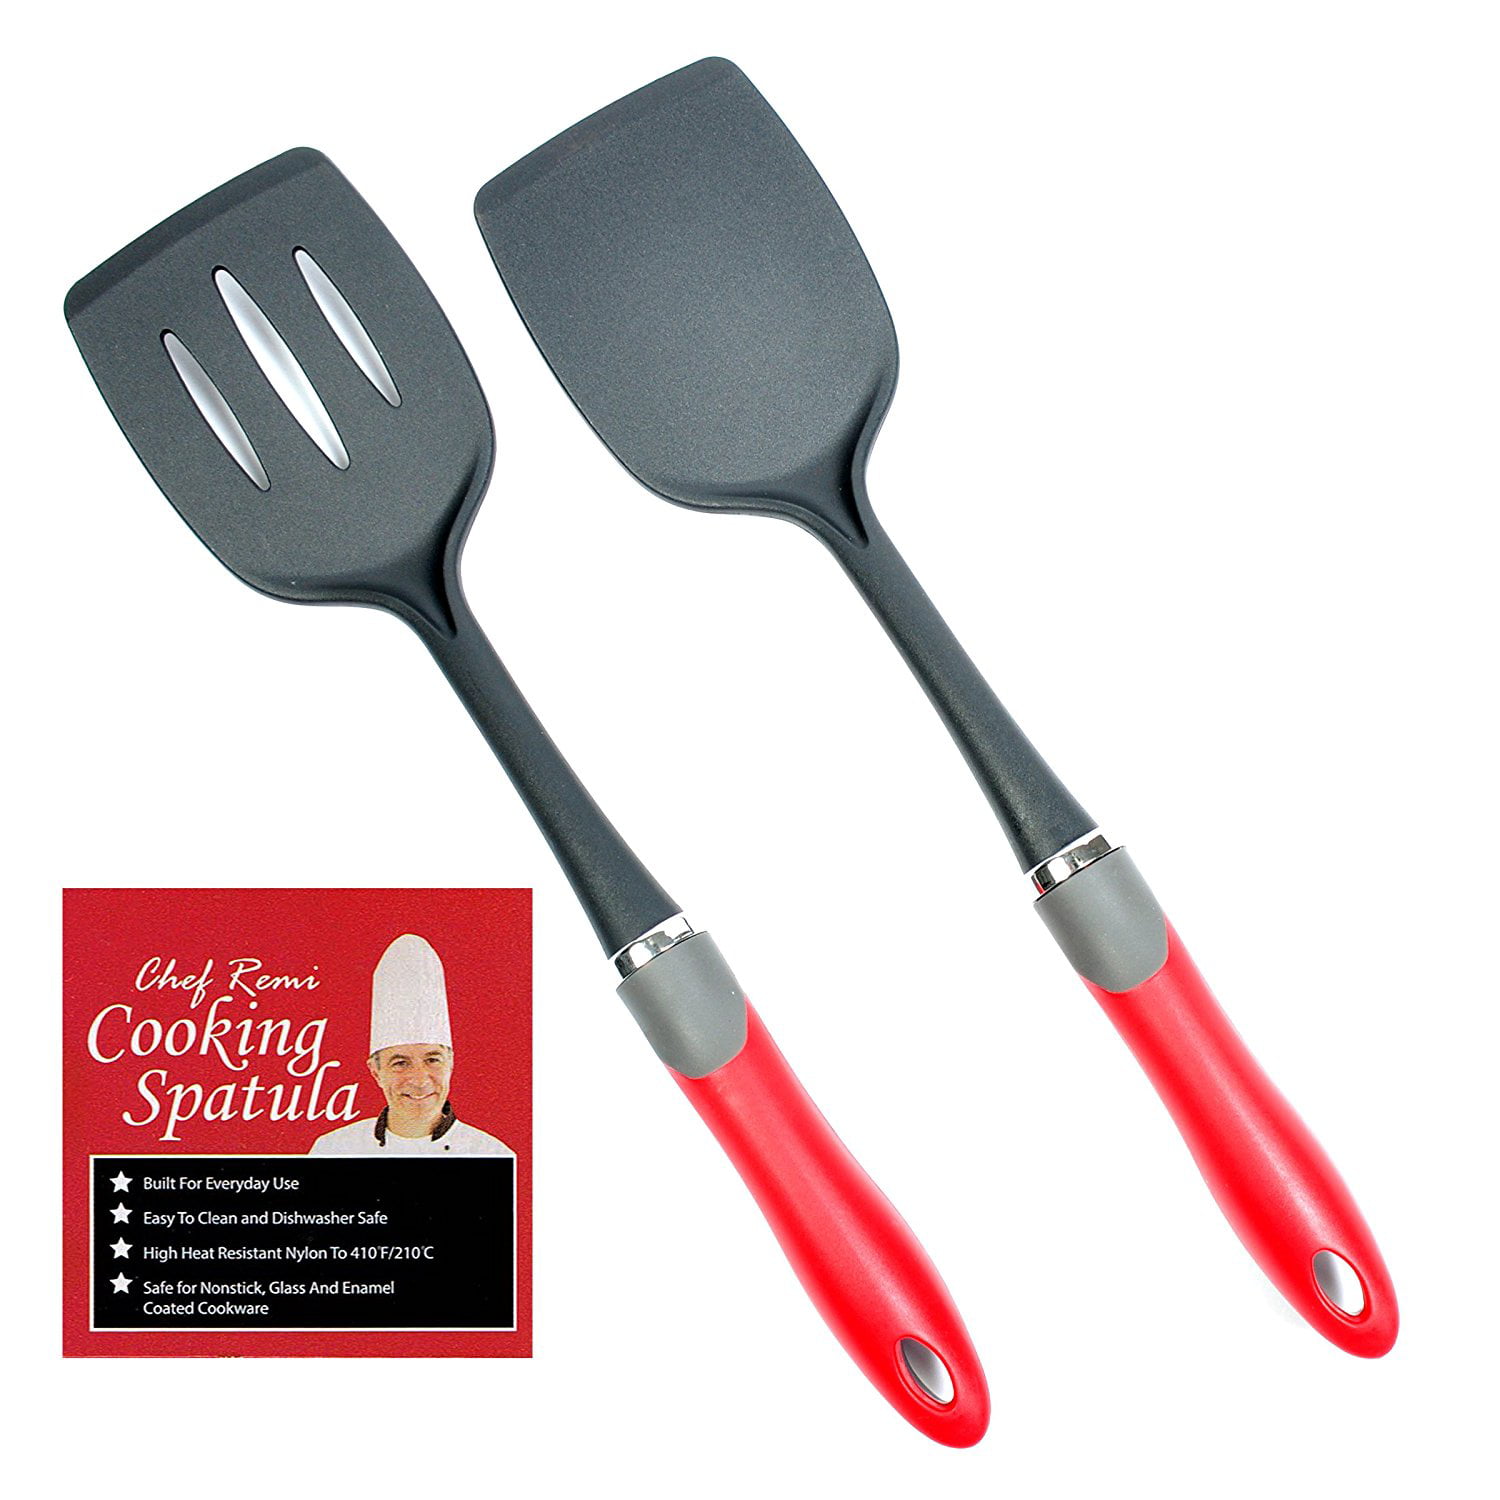 Latest 2-pc Kitchen Spatula Set - Lifetime Replacement Warranty - Multipurpose Solid And Slotted Spatulas -Nylon Utensils That Never Scratch Nonstick, Enamel, Teflon, Glass And Pyrex Pots And Pans